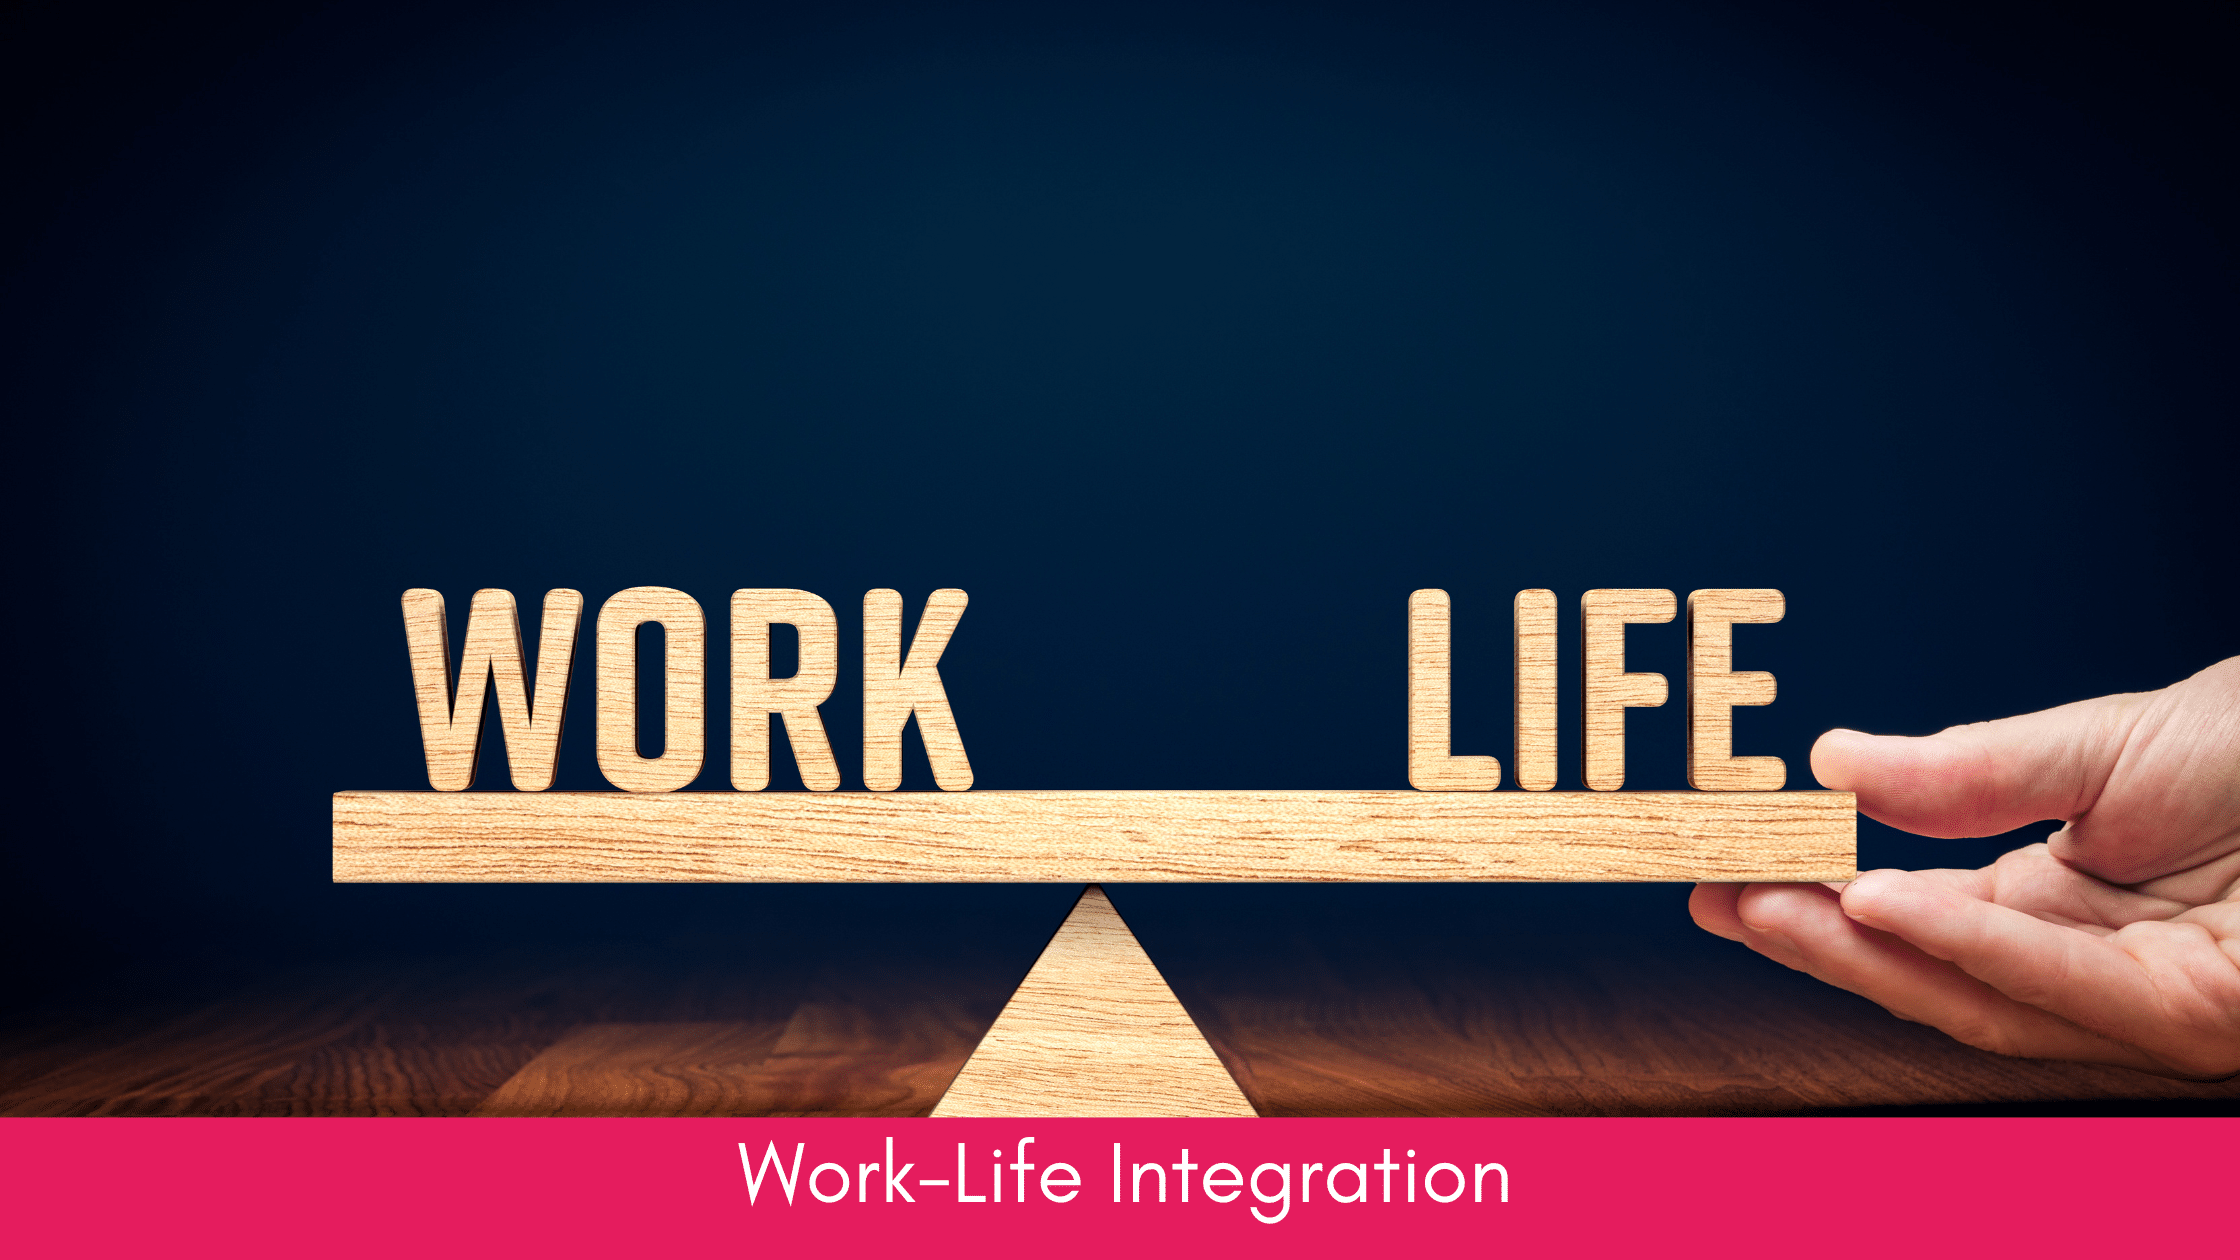 Work-life integration: how to achieve it